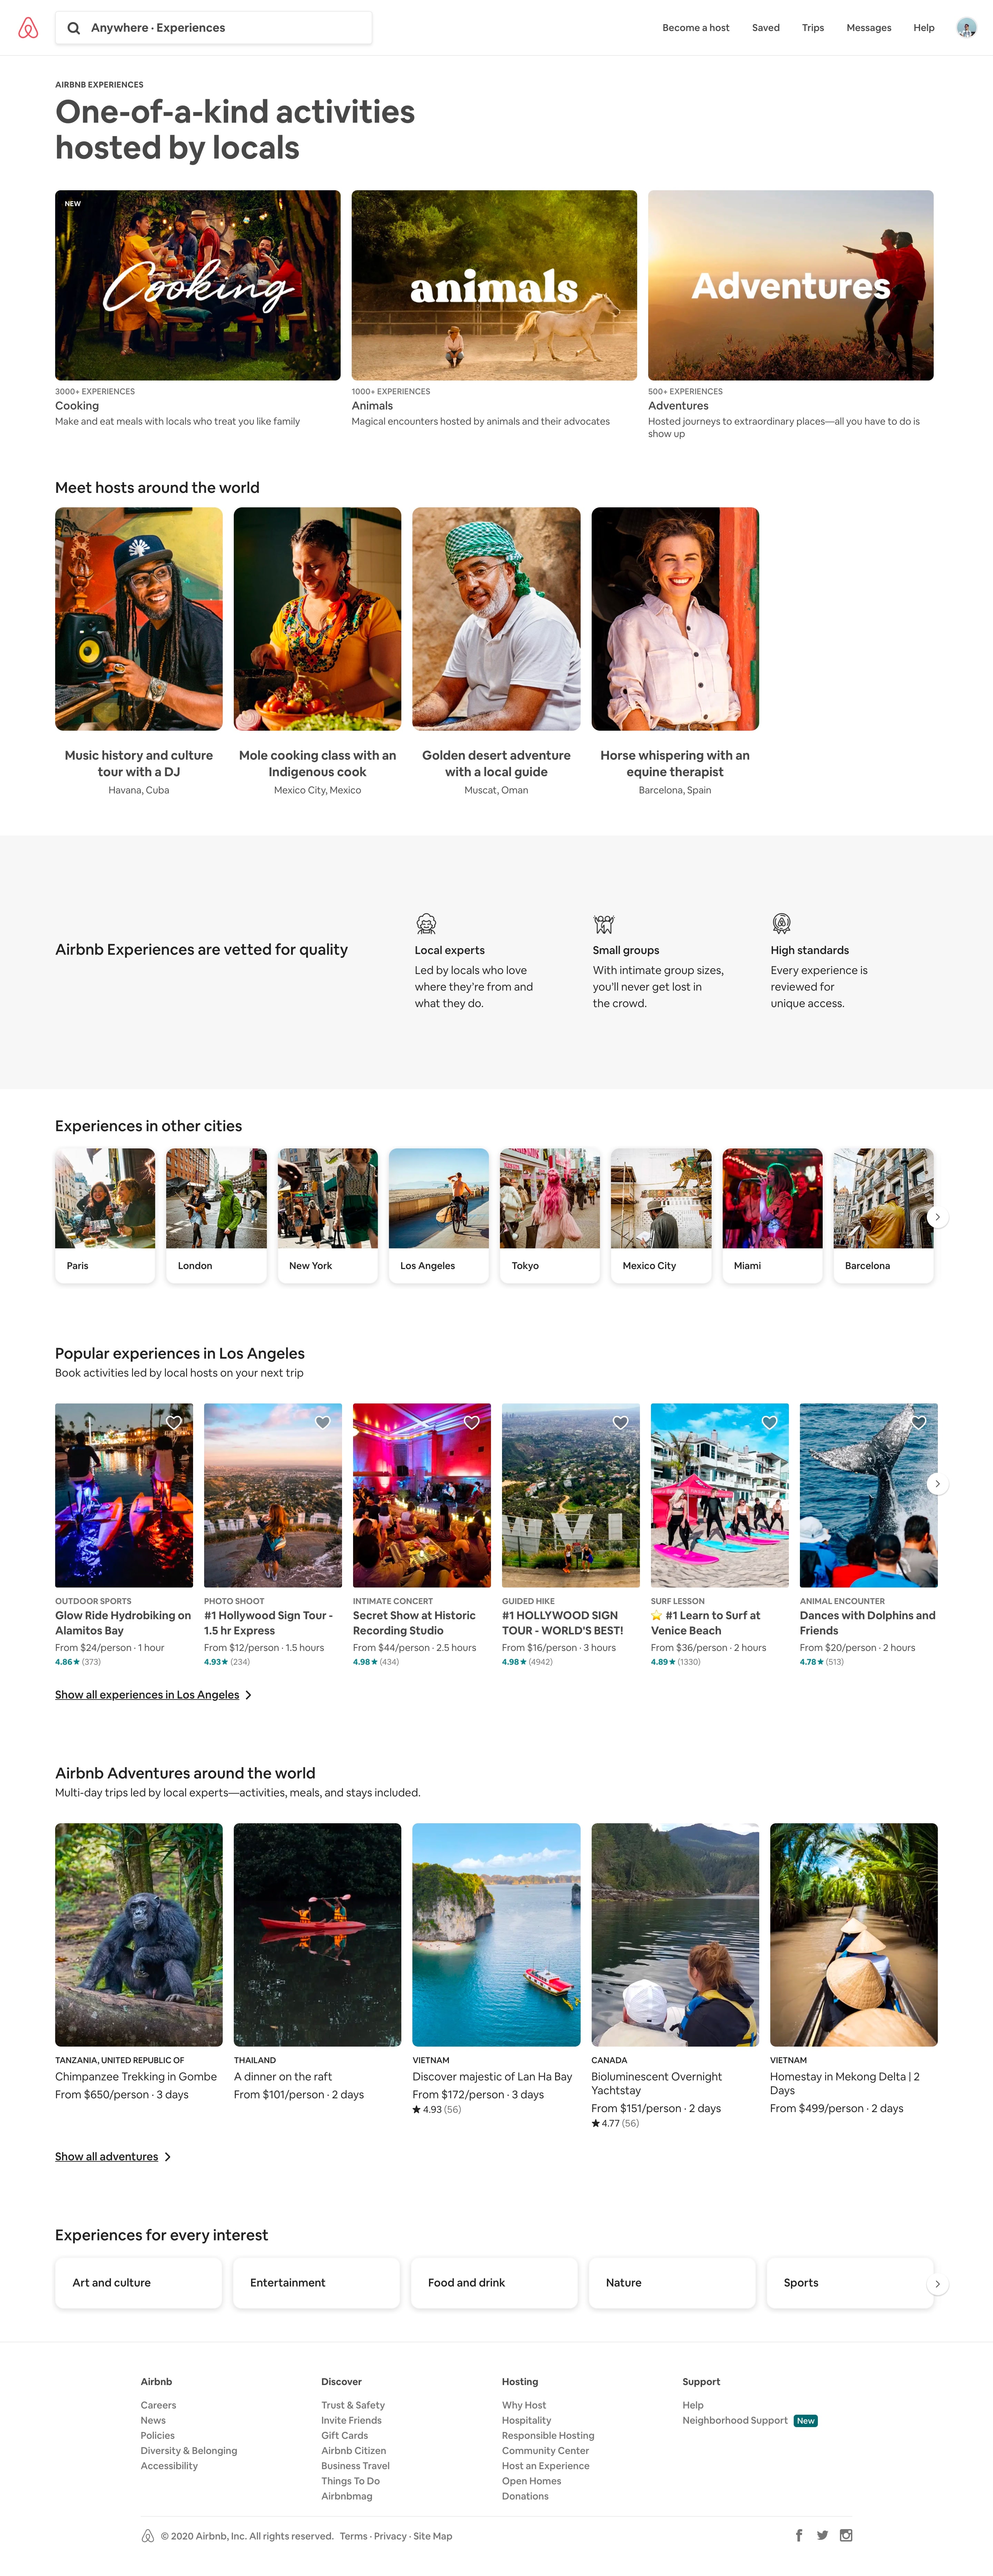 airbnb experiences page design